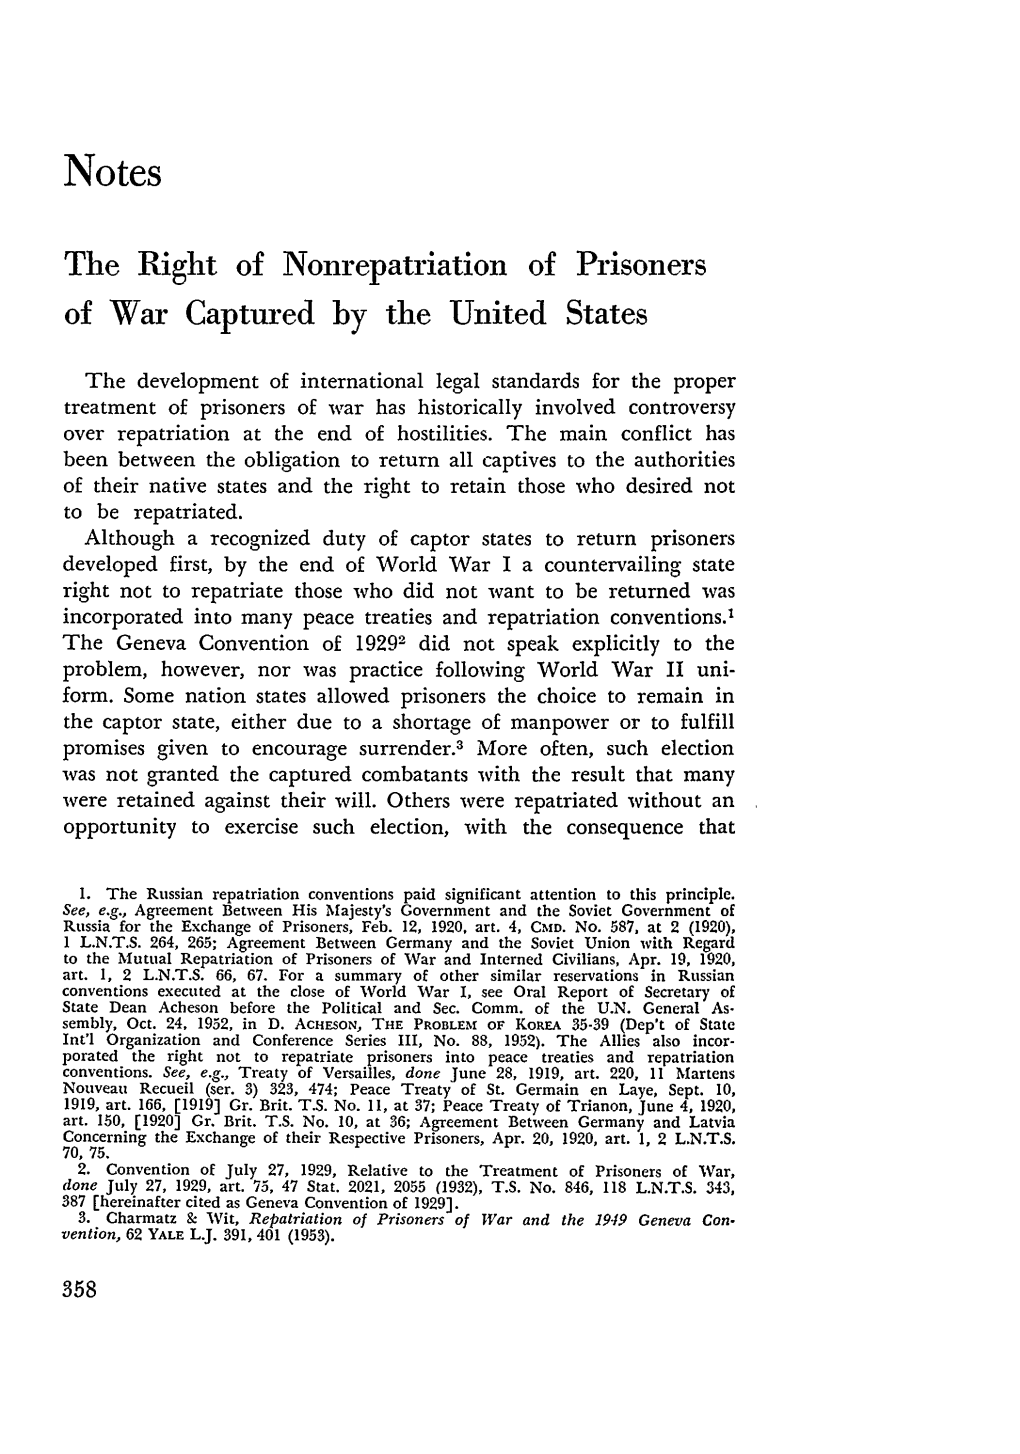 The Right of Nonrepatriation of Prisoners of War Captured by the United States